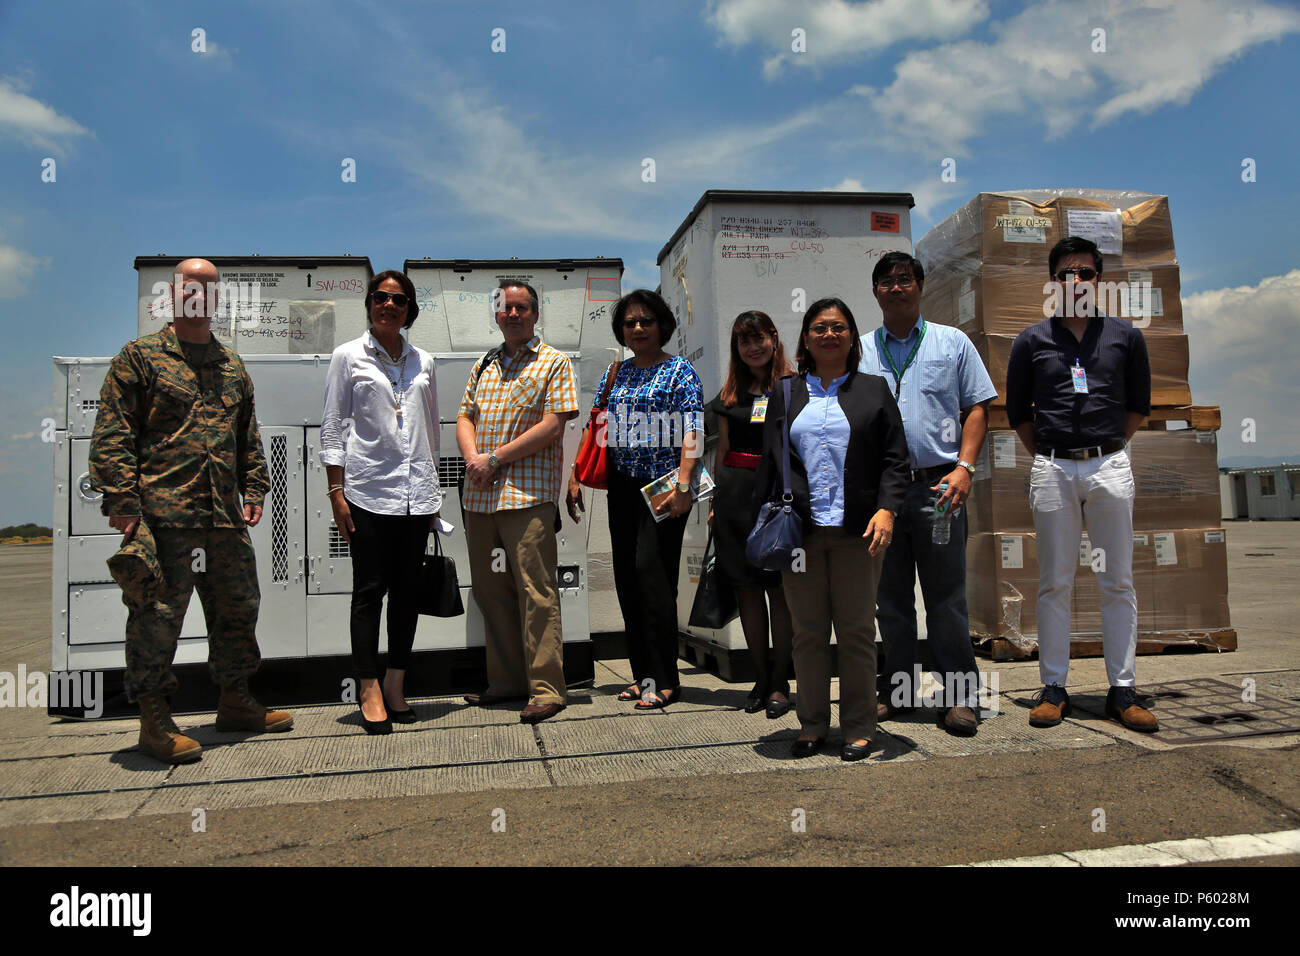 Members from the Philippine Department of Health, USAID and U.S. Navy pose for a photograph during a turnover of humanitarian assistance equipment during exercise Balikatan in Subic, Philippines April 6, 2016. The exercise provided an opportunity to deliver the equipment on U.S. Naval Ships to the Philippines. Balikatan, which means 'shoulder to shoulder' in Filipino, is an annual bilateral training exercise focused on improving the ability of Philippine and U.S. military forces to work together during planning, contingency and humanitarian assistance and disaster relief operations.  (U.S. Mar Stock Photo